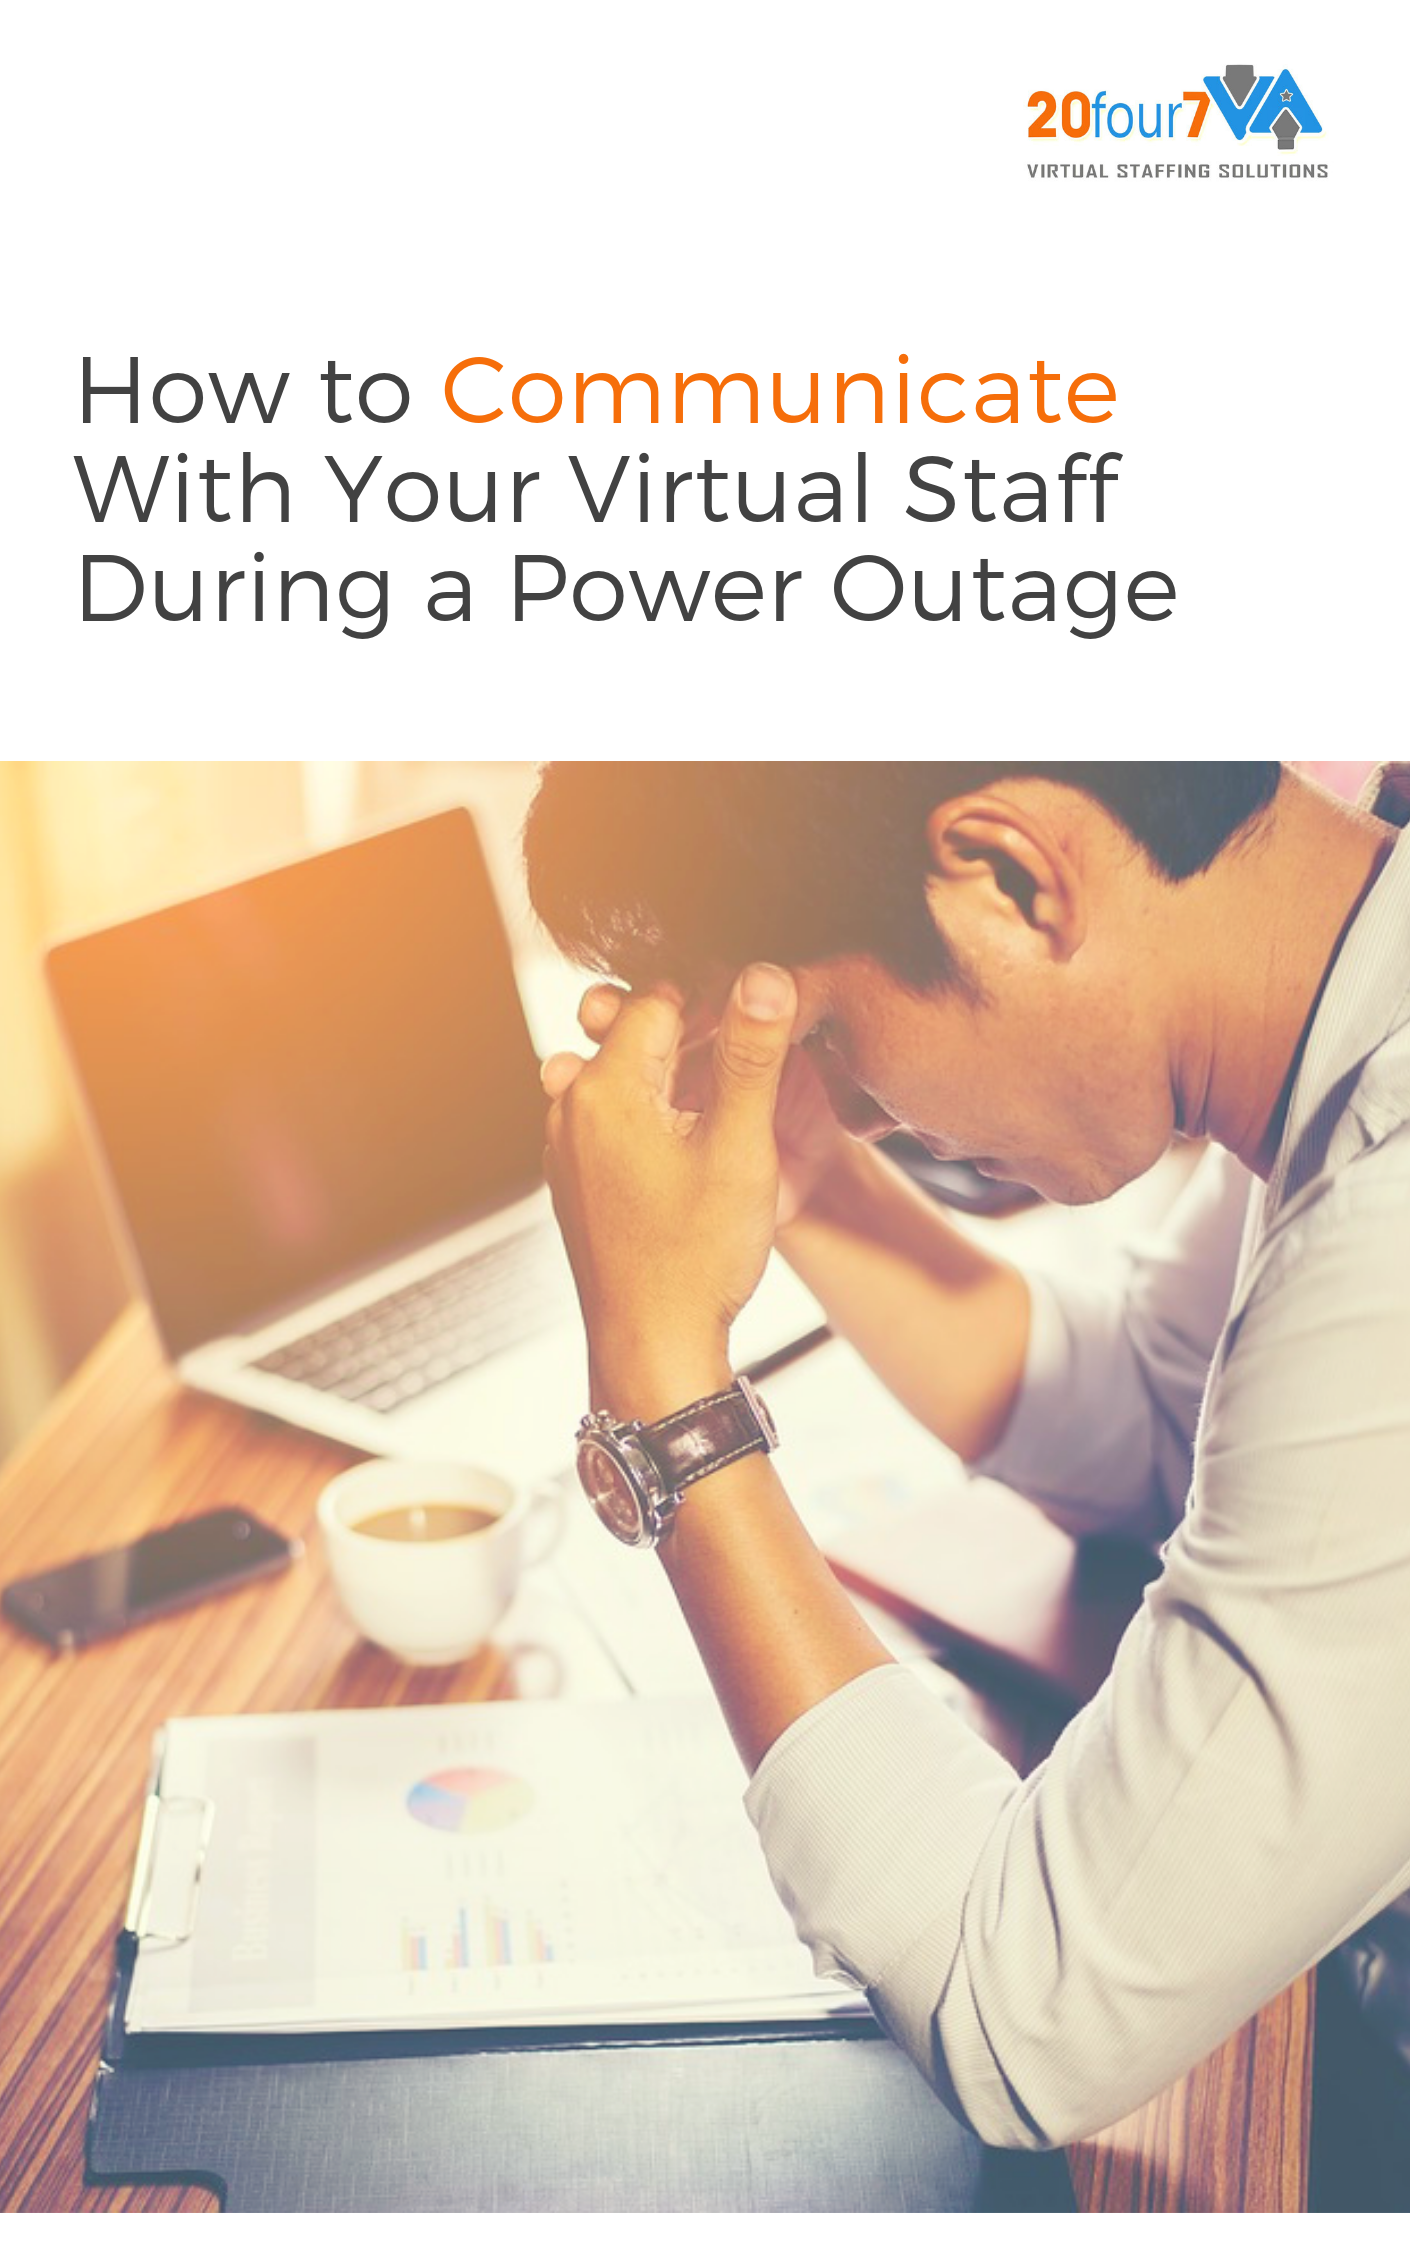 How to Communicate With Your Virtual Staff During a Power Outage